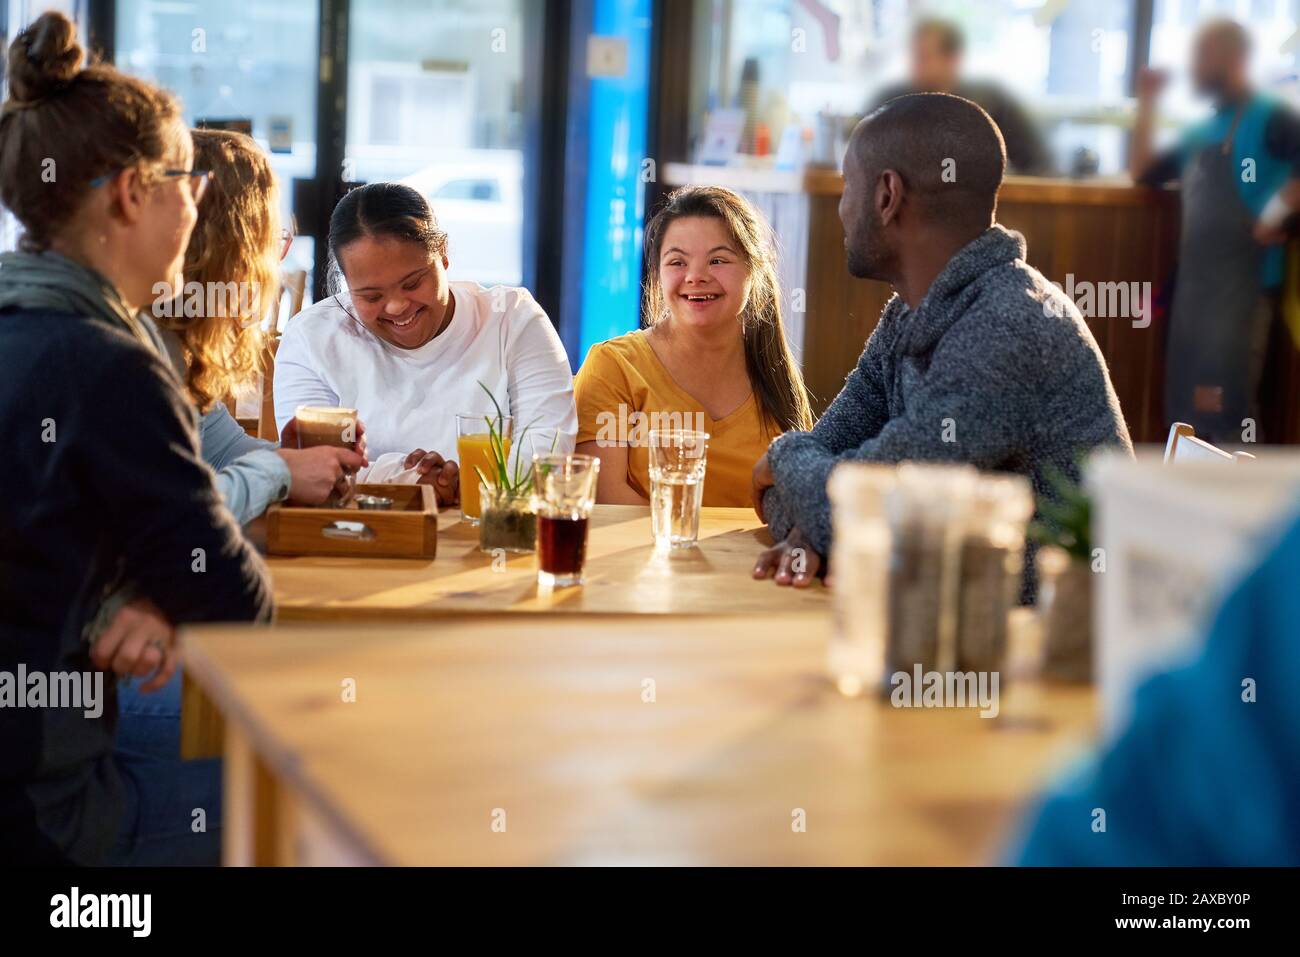 Young women with Down Syndrome talking with friends in cafe Stock Photo